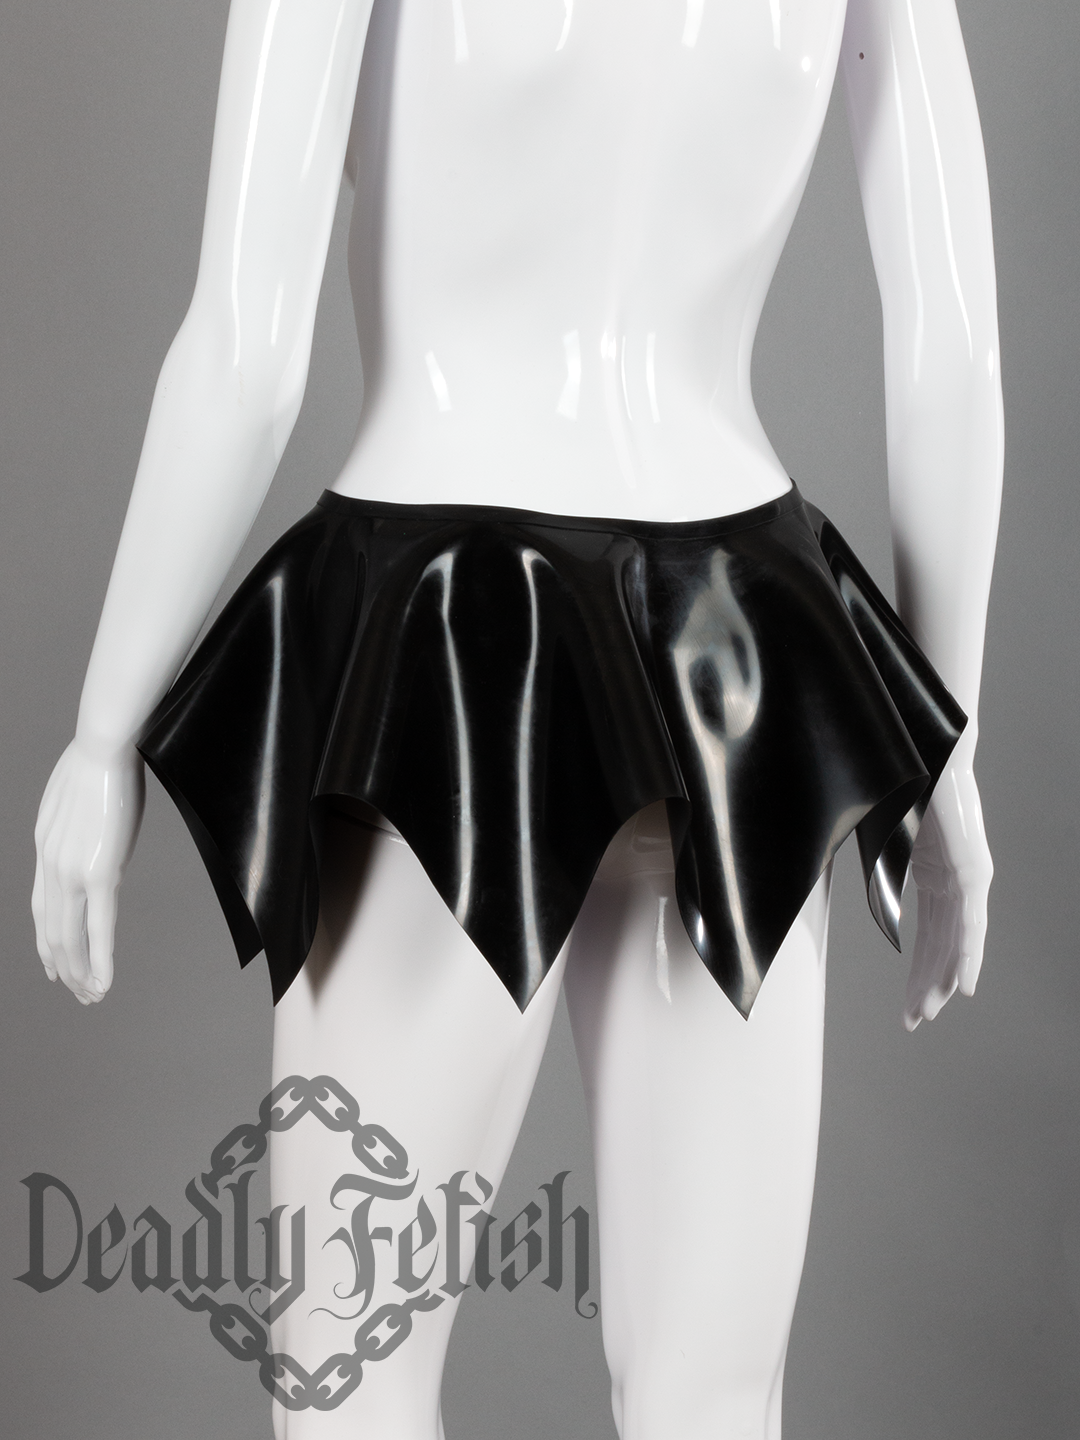 Deadly Fetish Made-To-Order Latex: Skirt #14